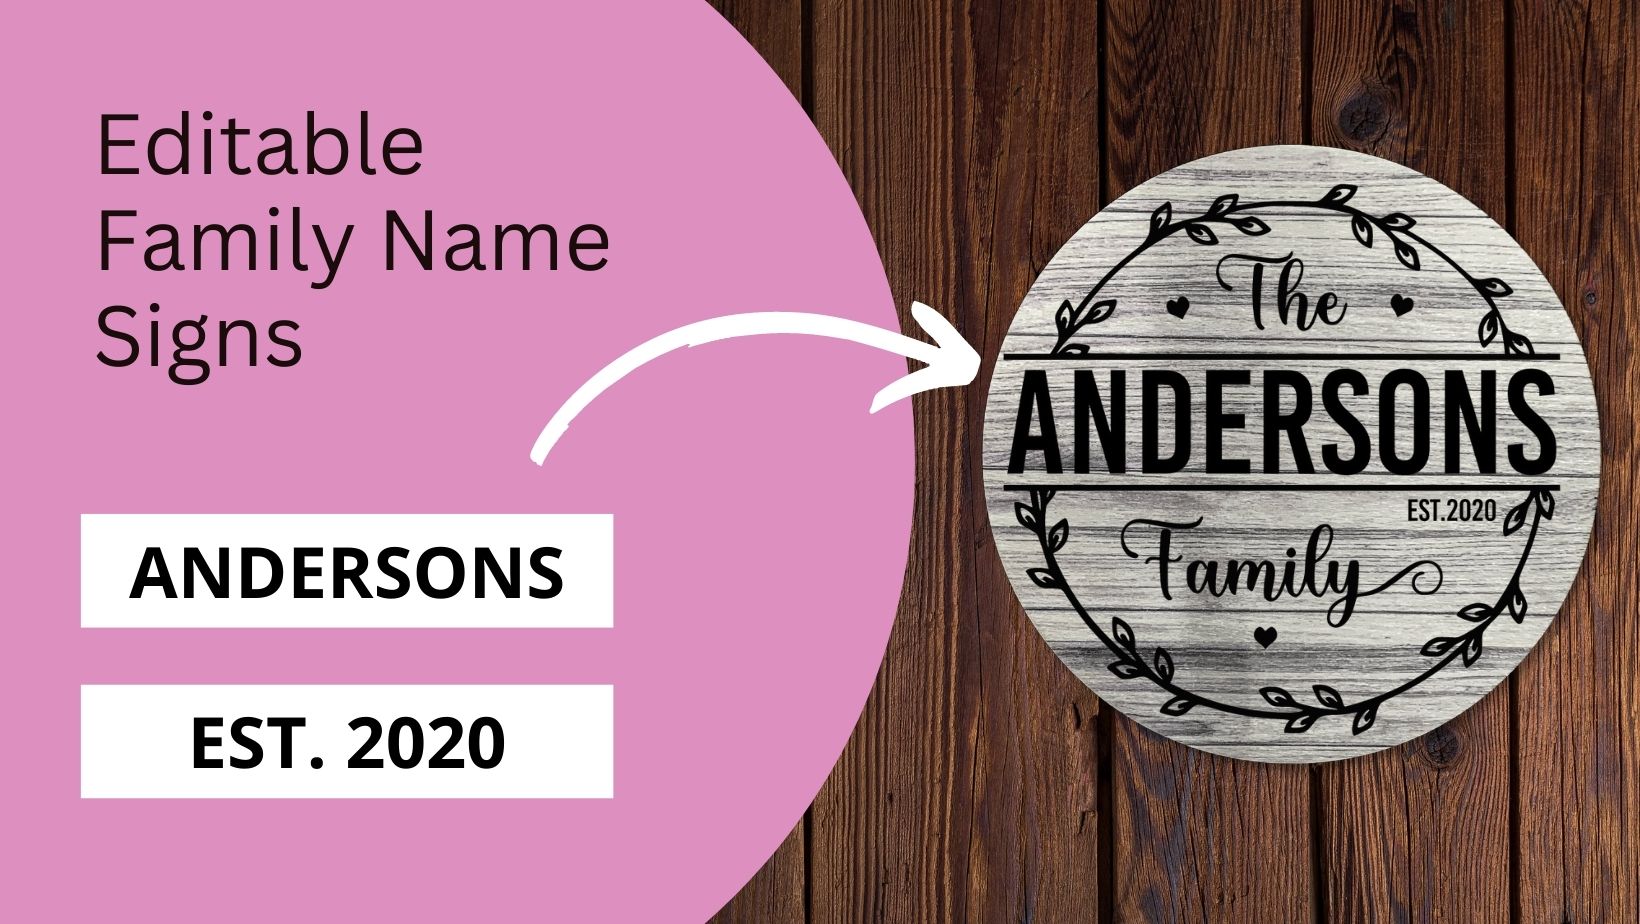 Editable Family Name Signs personalize customize cricut svg download